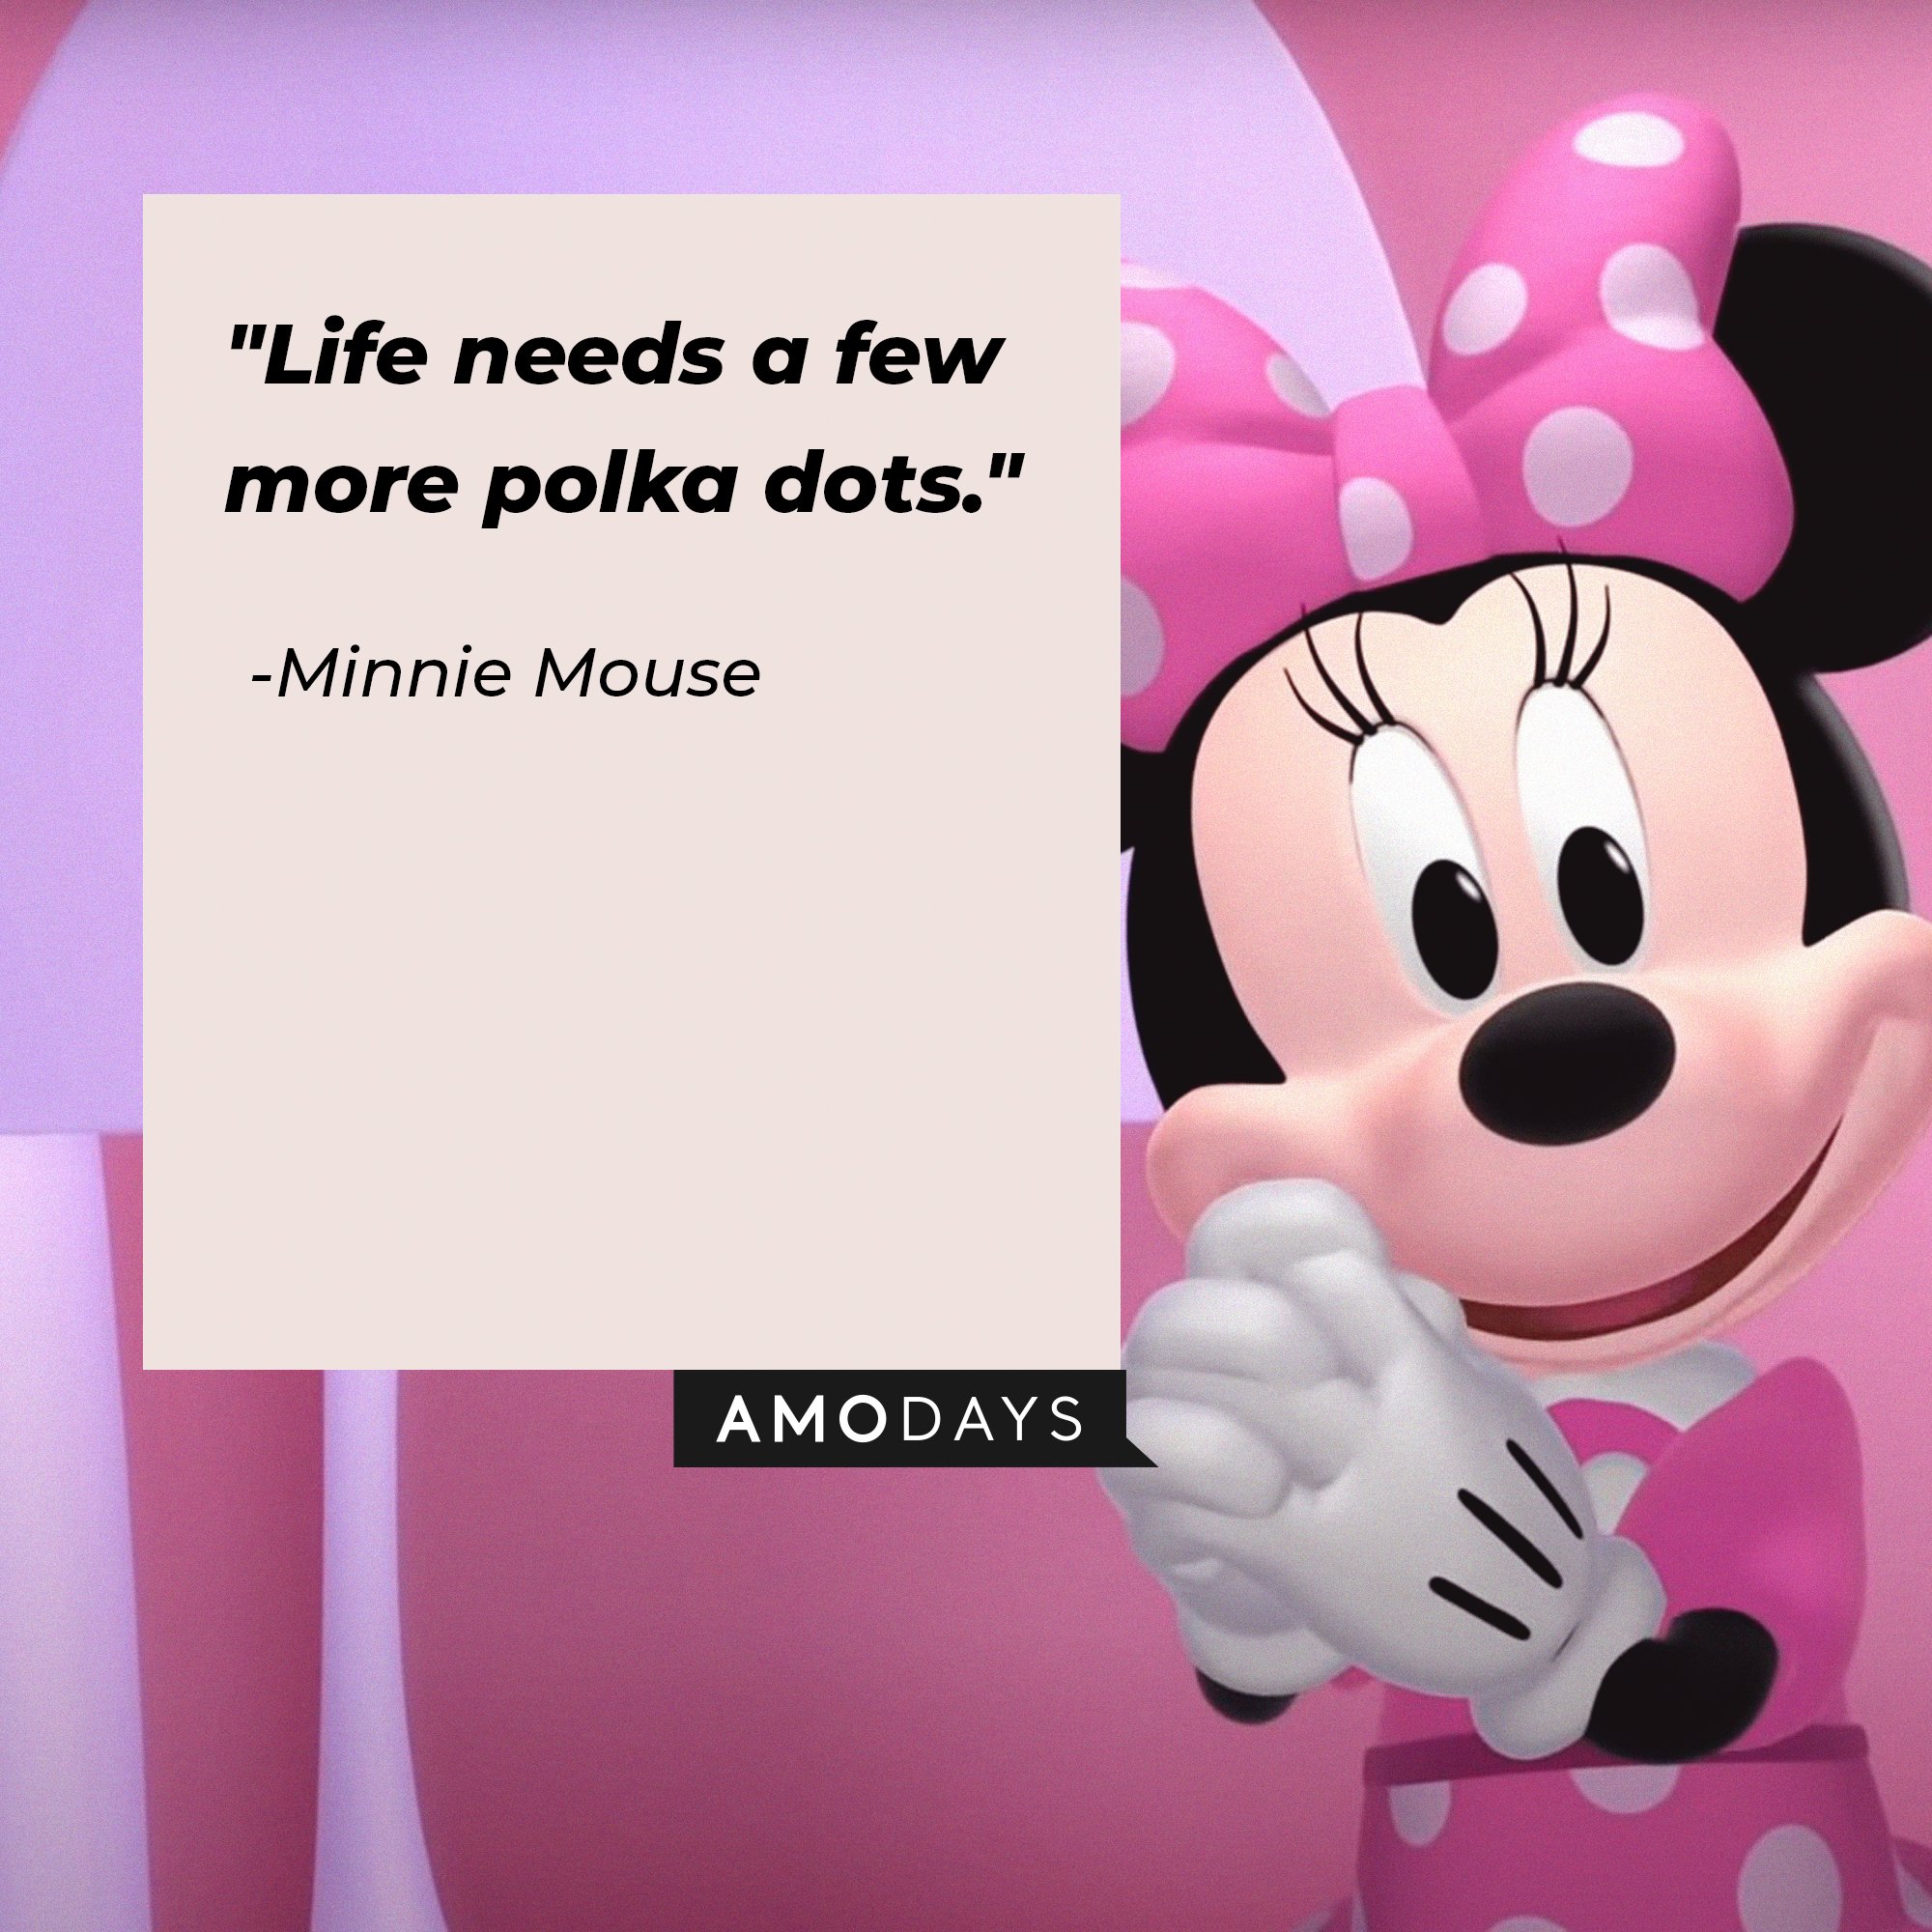 Minnie Mouse’s quote: "Life needs a few more polka dots." | Image: AmoDays